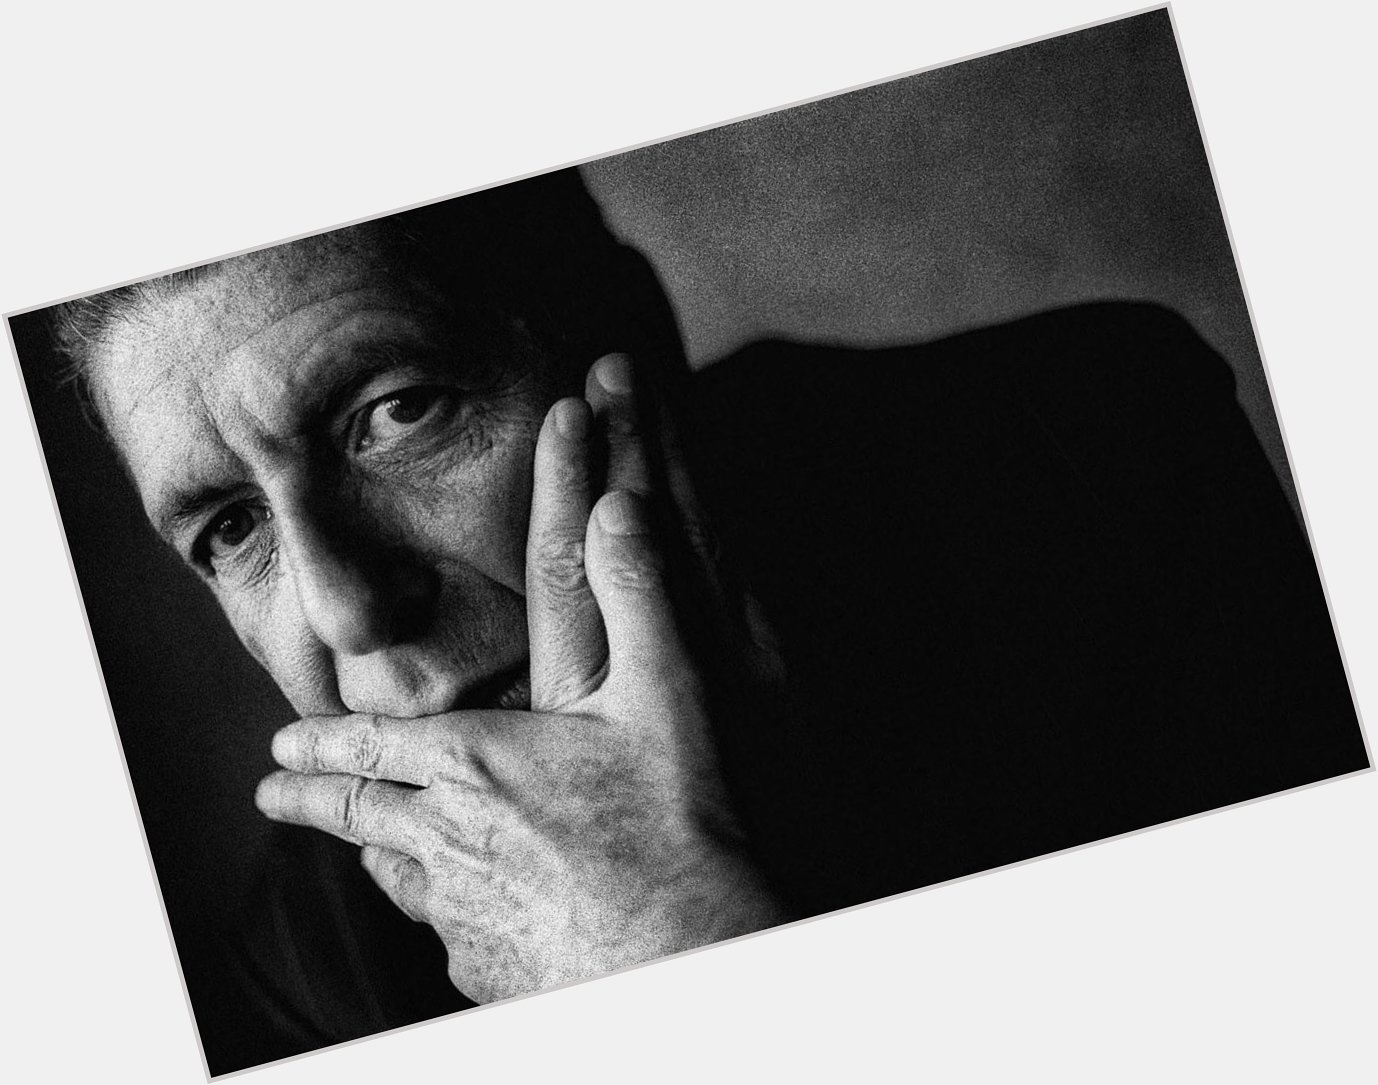 Happy birthday to the singer, songwriter and poet, the wonderful Leonard Cohen. 